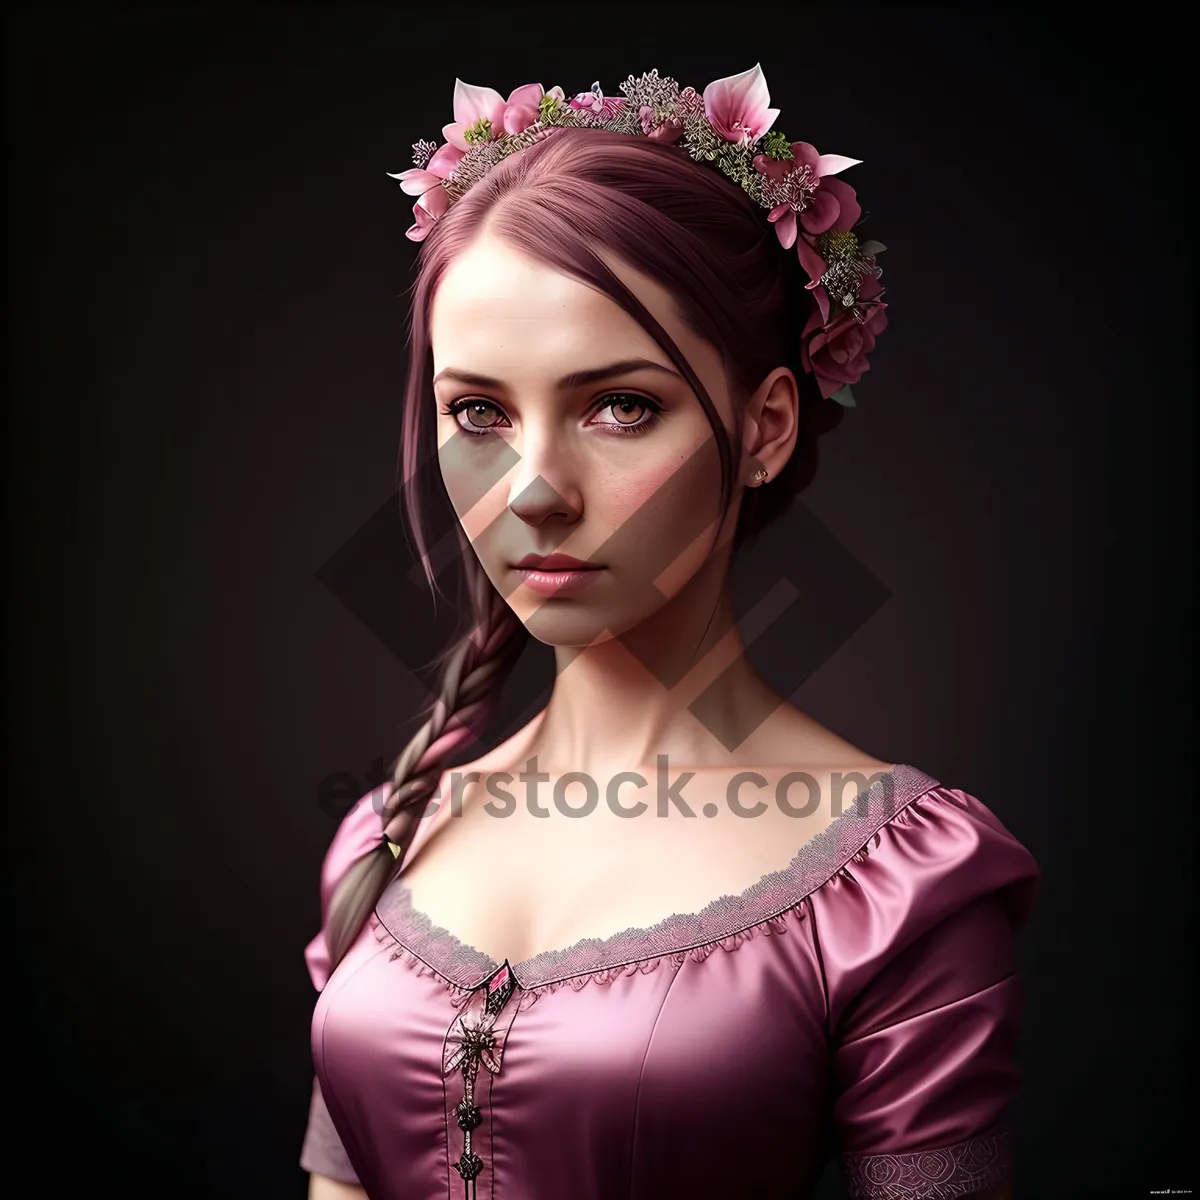 Picture of Stunning Aristocratic Princess Portrait with Seductive Charm